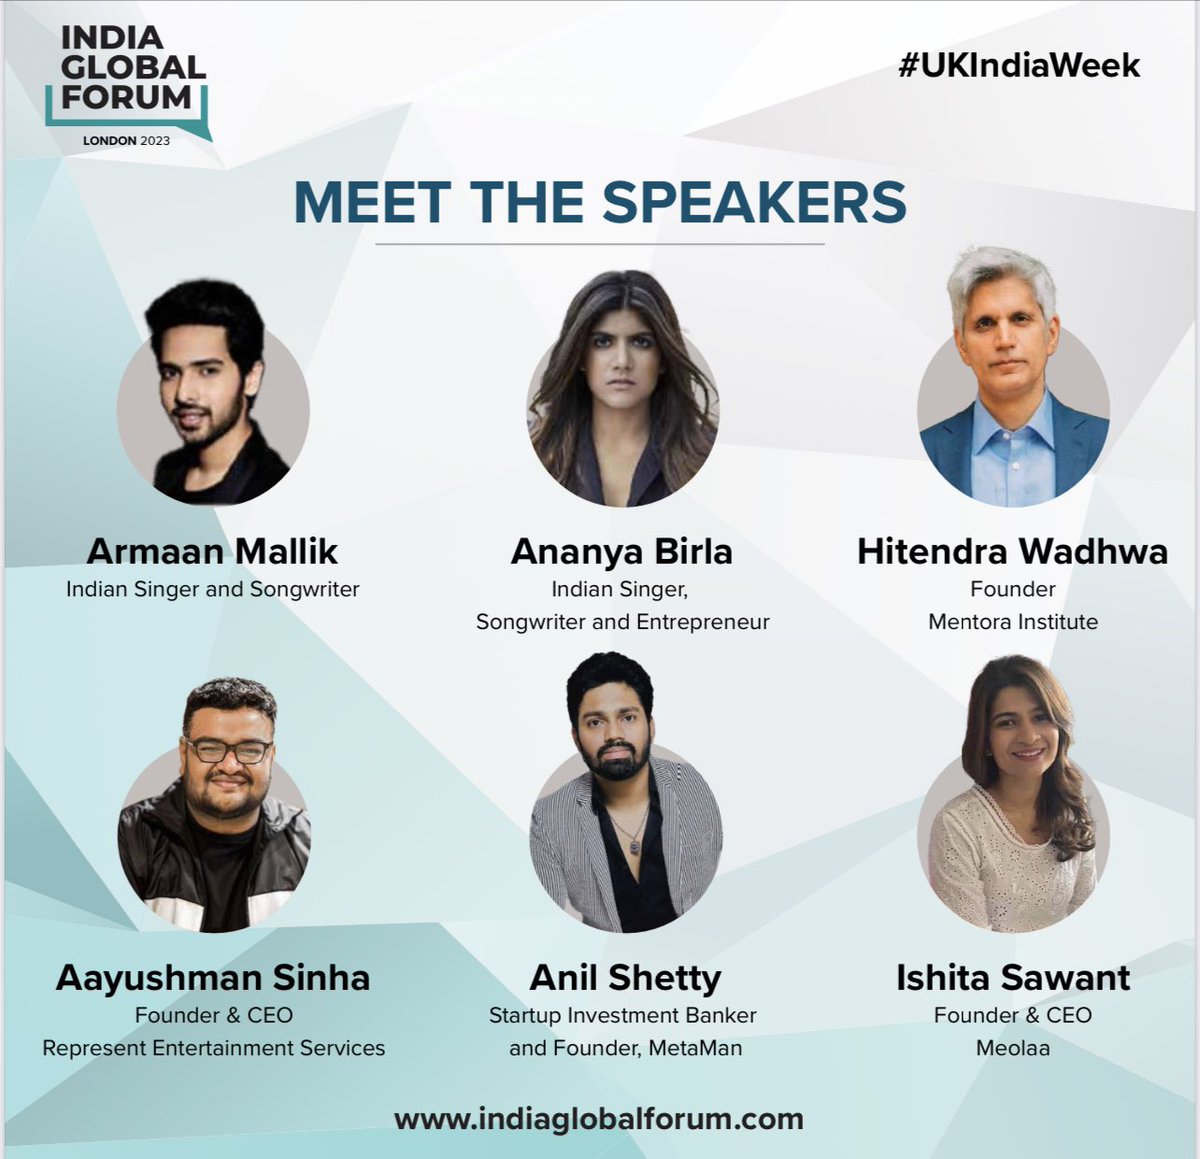 Looking forward to interacting with our Future Changemakers at India Global Forum 'Young Leaders Forum' on 24 June The Nehru Centre, Londom and kick start #UKIndiaWeek 2023. Join Us!